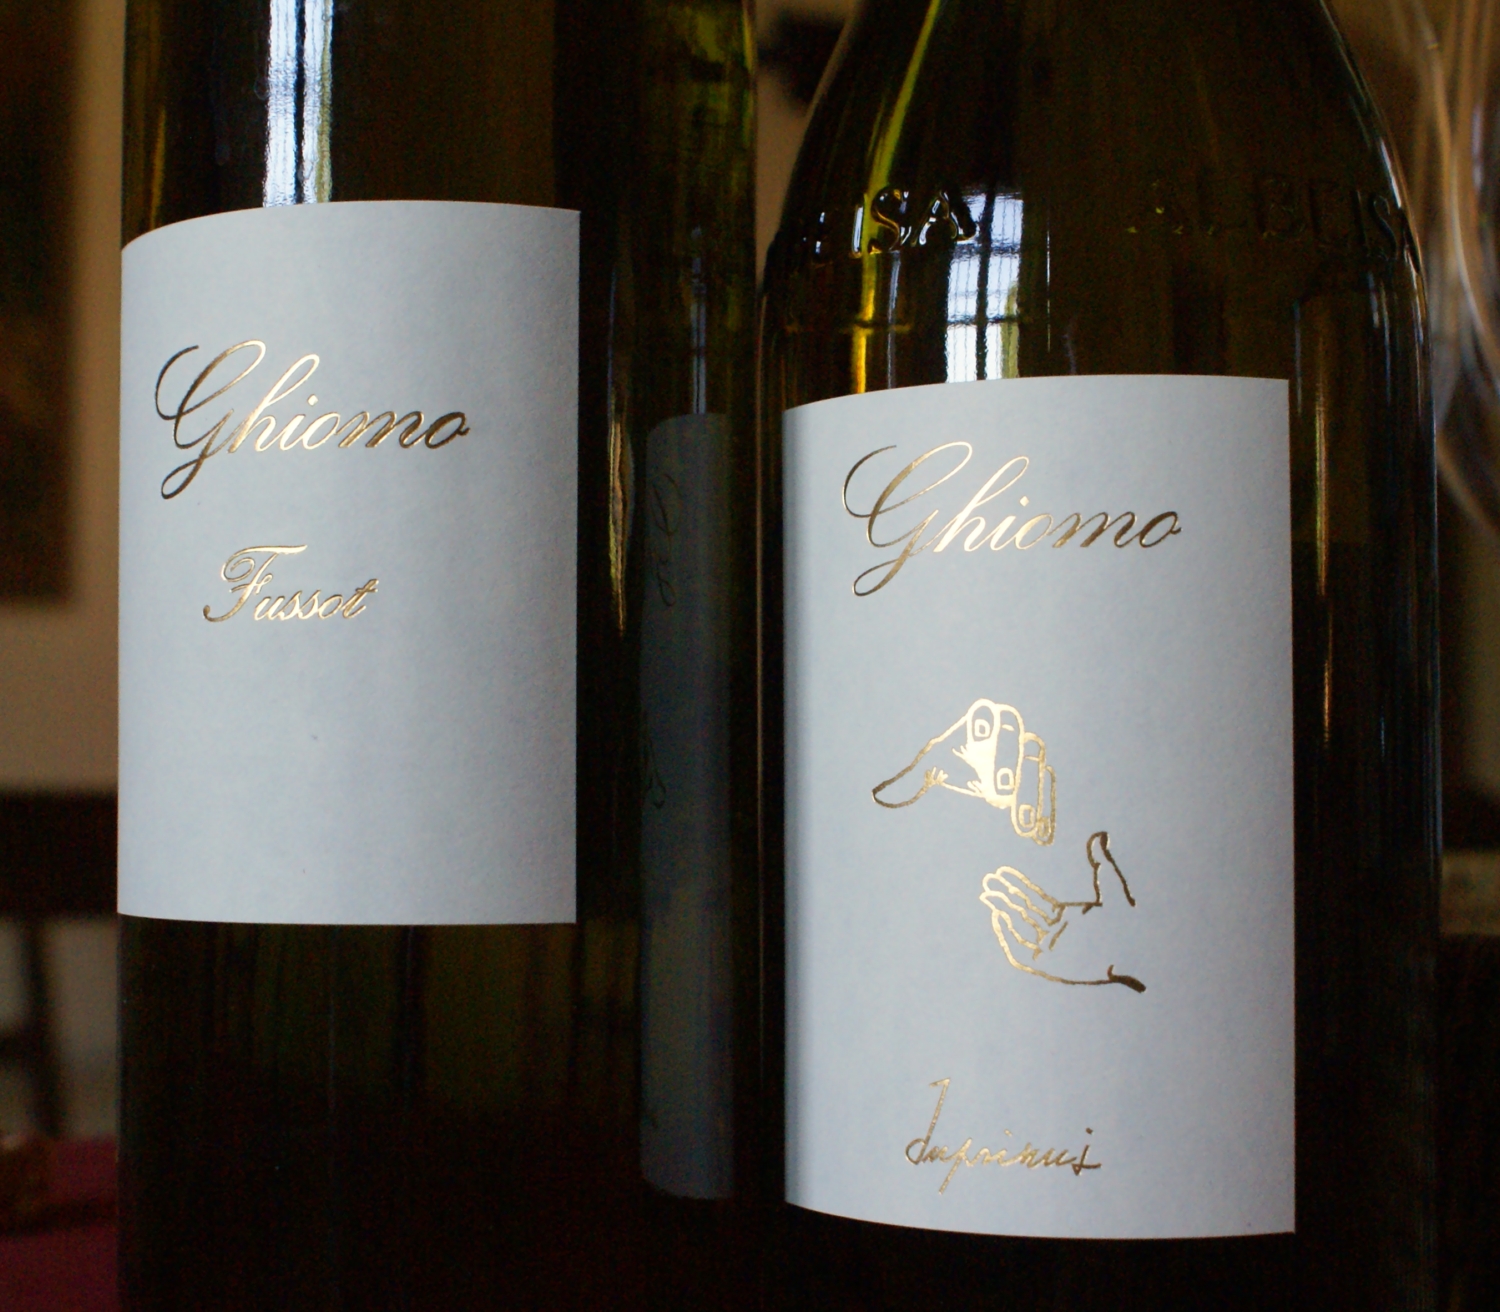 The best Arneis money can buy: Ghiomo’s Fussot and ambitious Inprimis.